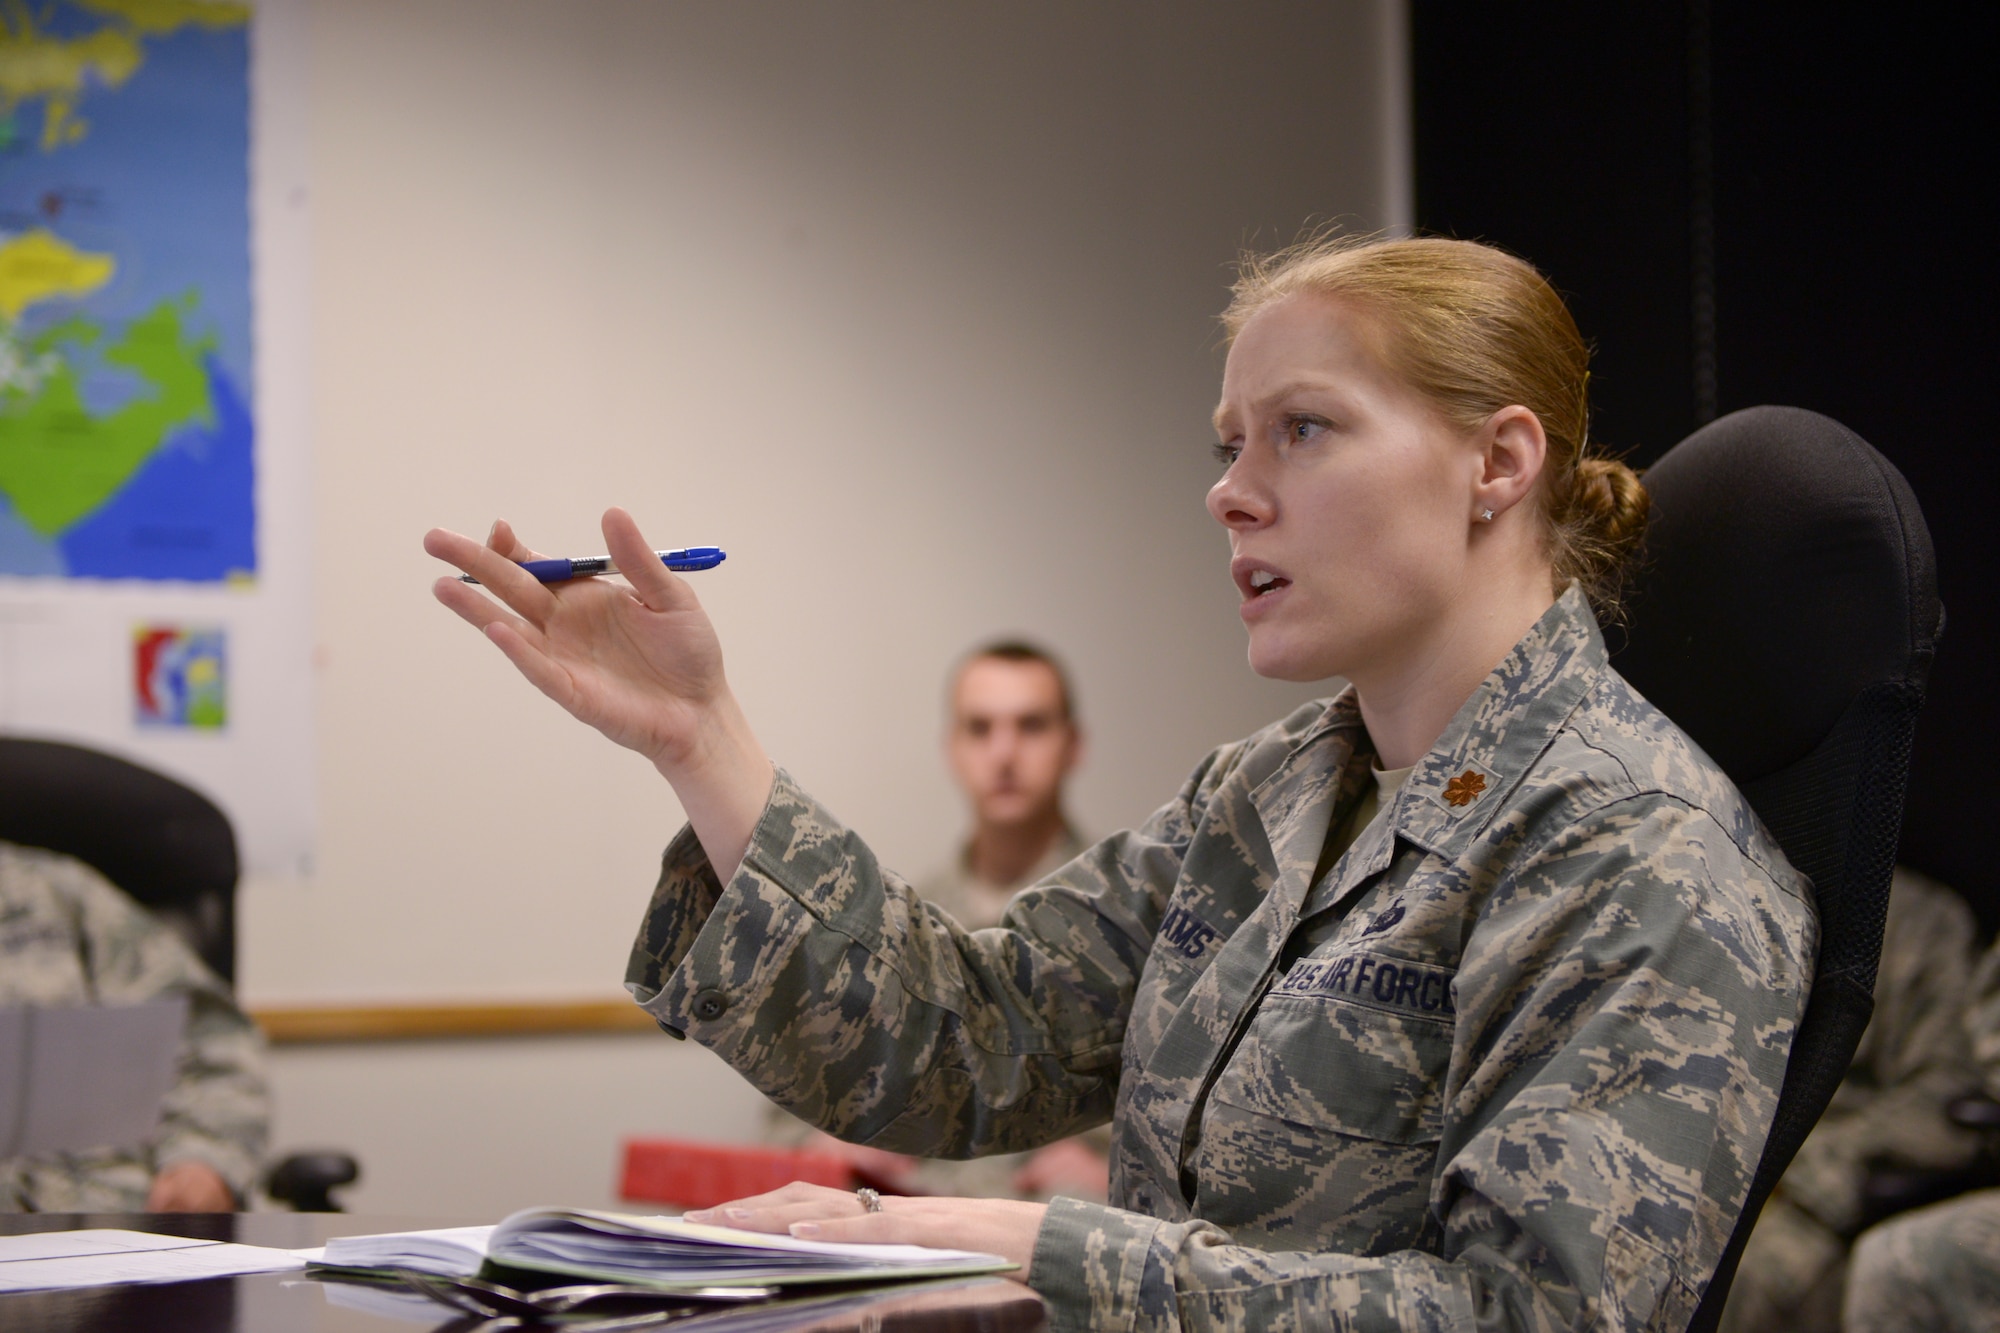 U.S. Air Force Maj. Victoria Williams, the 354th Fighter Wing senior intelligence  officer, holds a training session with her Airmen at Eielson Air Force Base, Alaska, March 26, 2015. Williams enhanced her Airmen's capability to communicate information properly to audience members. (U.S. Air Force photo by Senior Airman Peter Reft/Released)